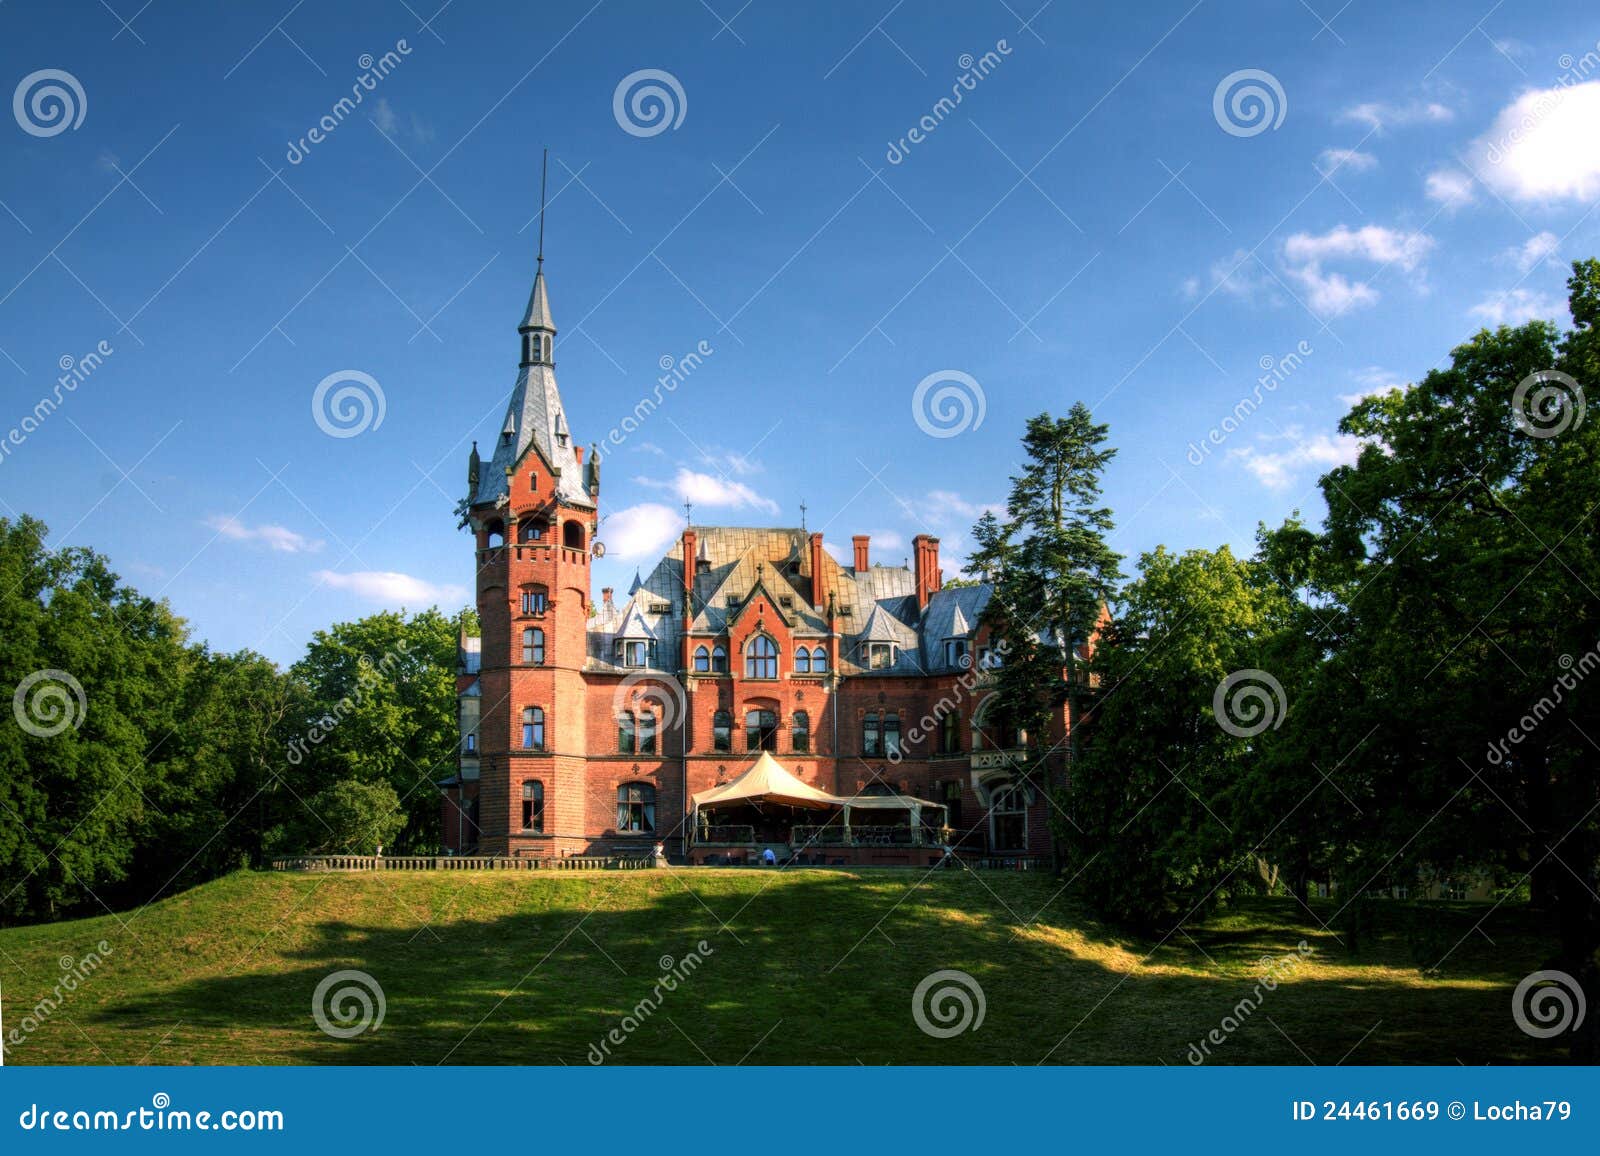 Palace in Wasowo. Palace in Greater Poland Voivodeship, in west-central Poland.